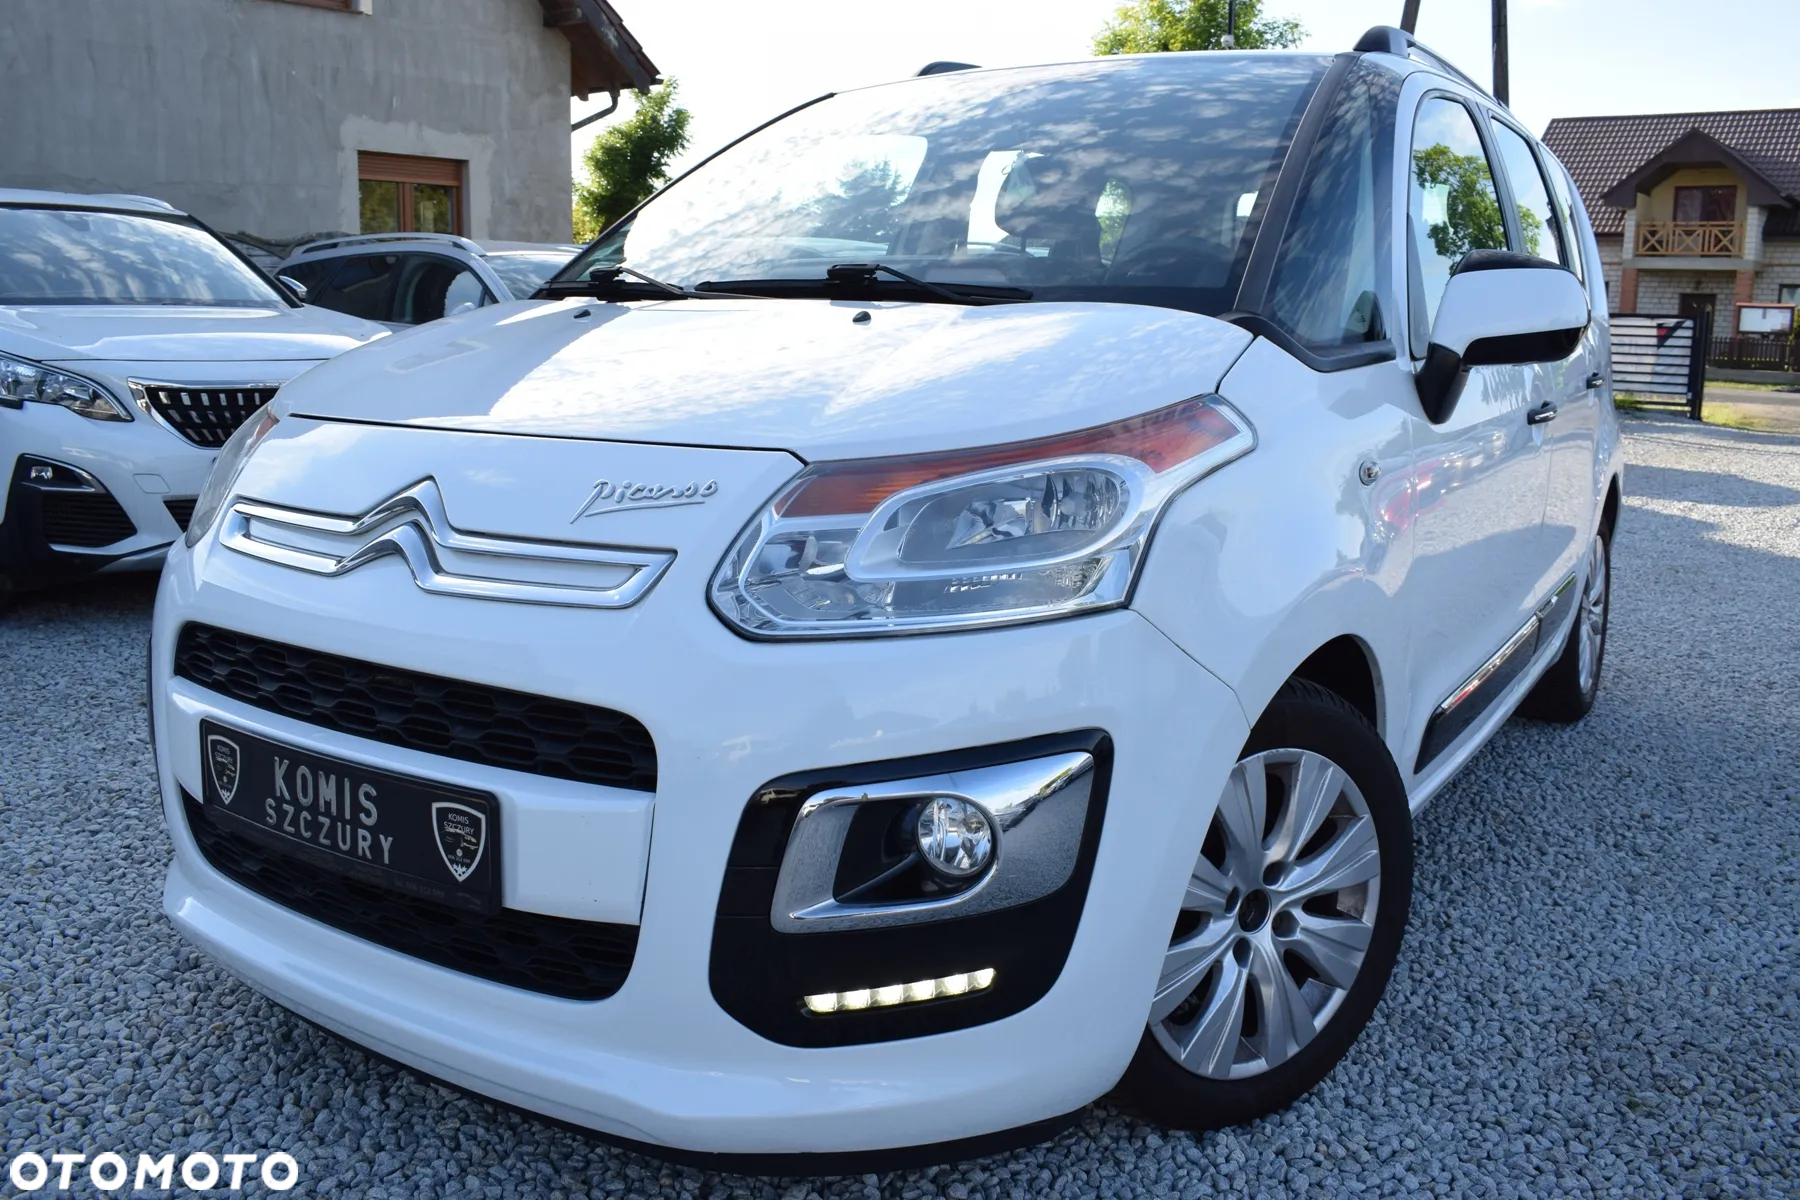 Citroën C3 Picasso 1.6 HDi Selection - 4